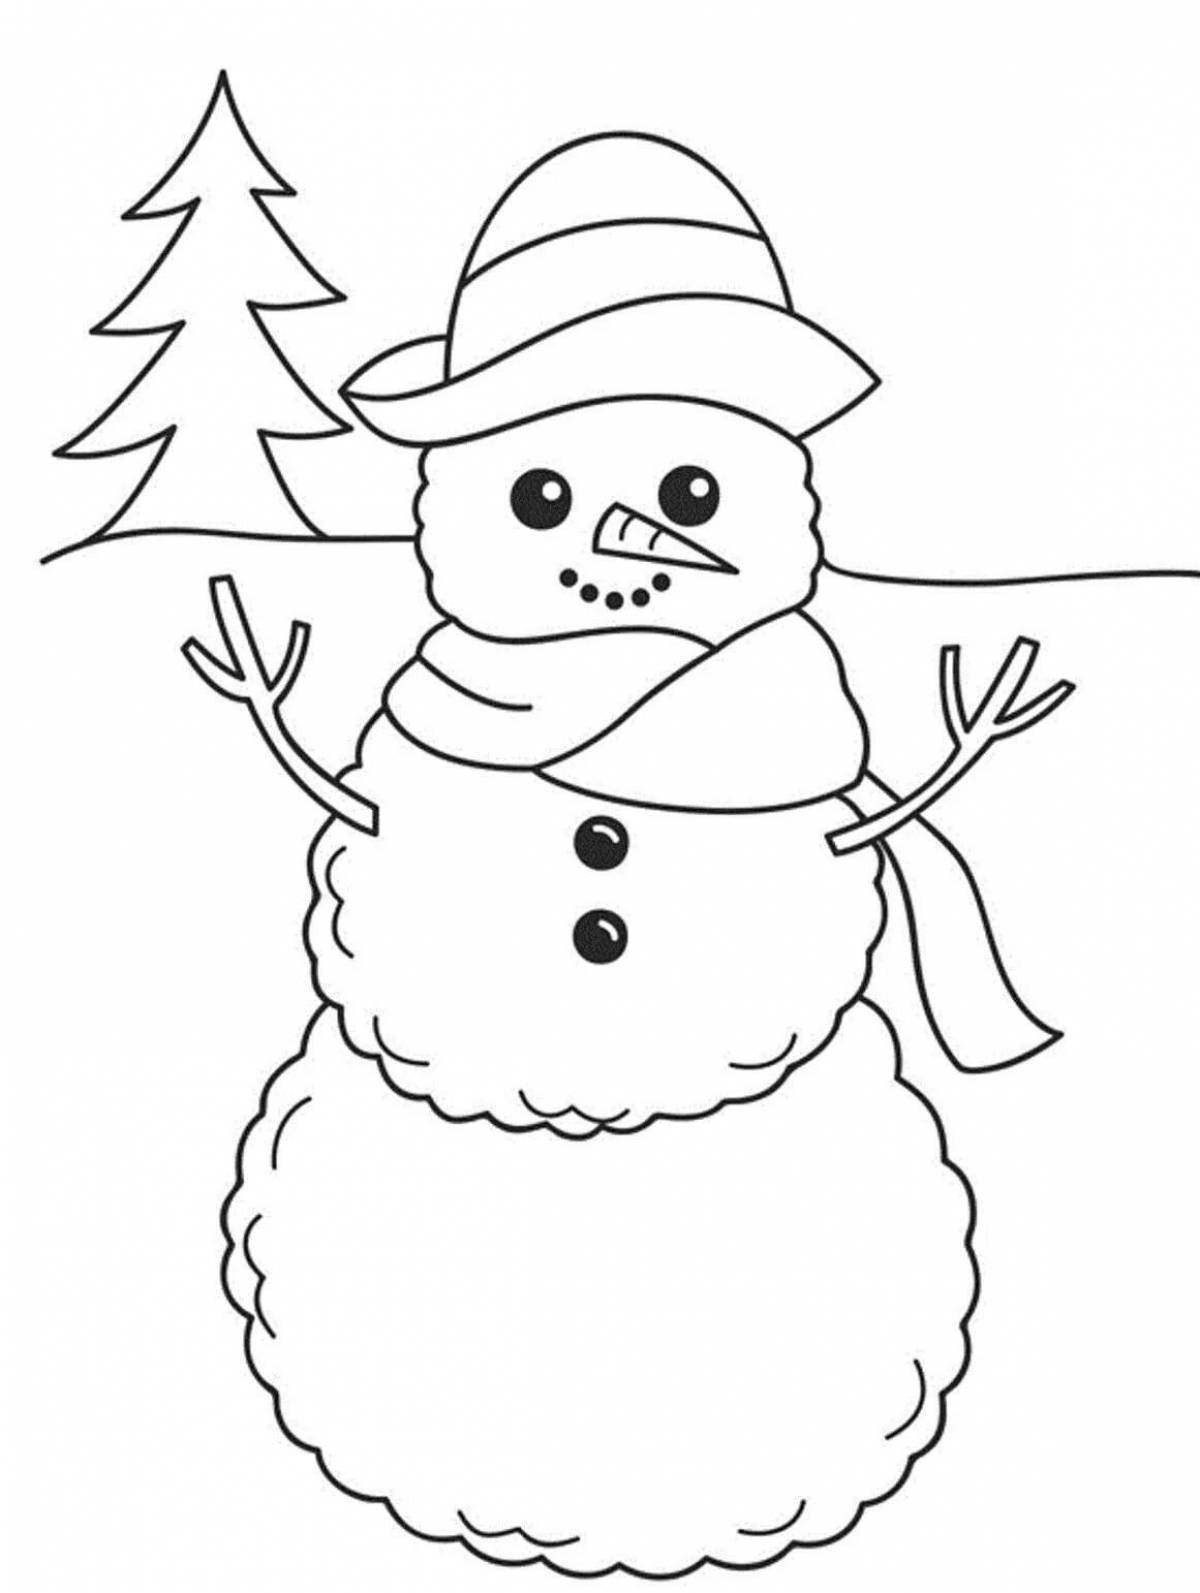 Silly coloring cute snowman